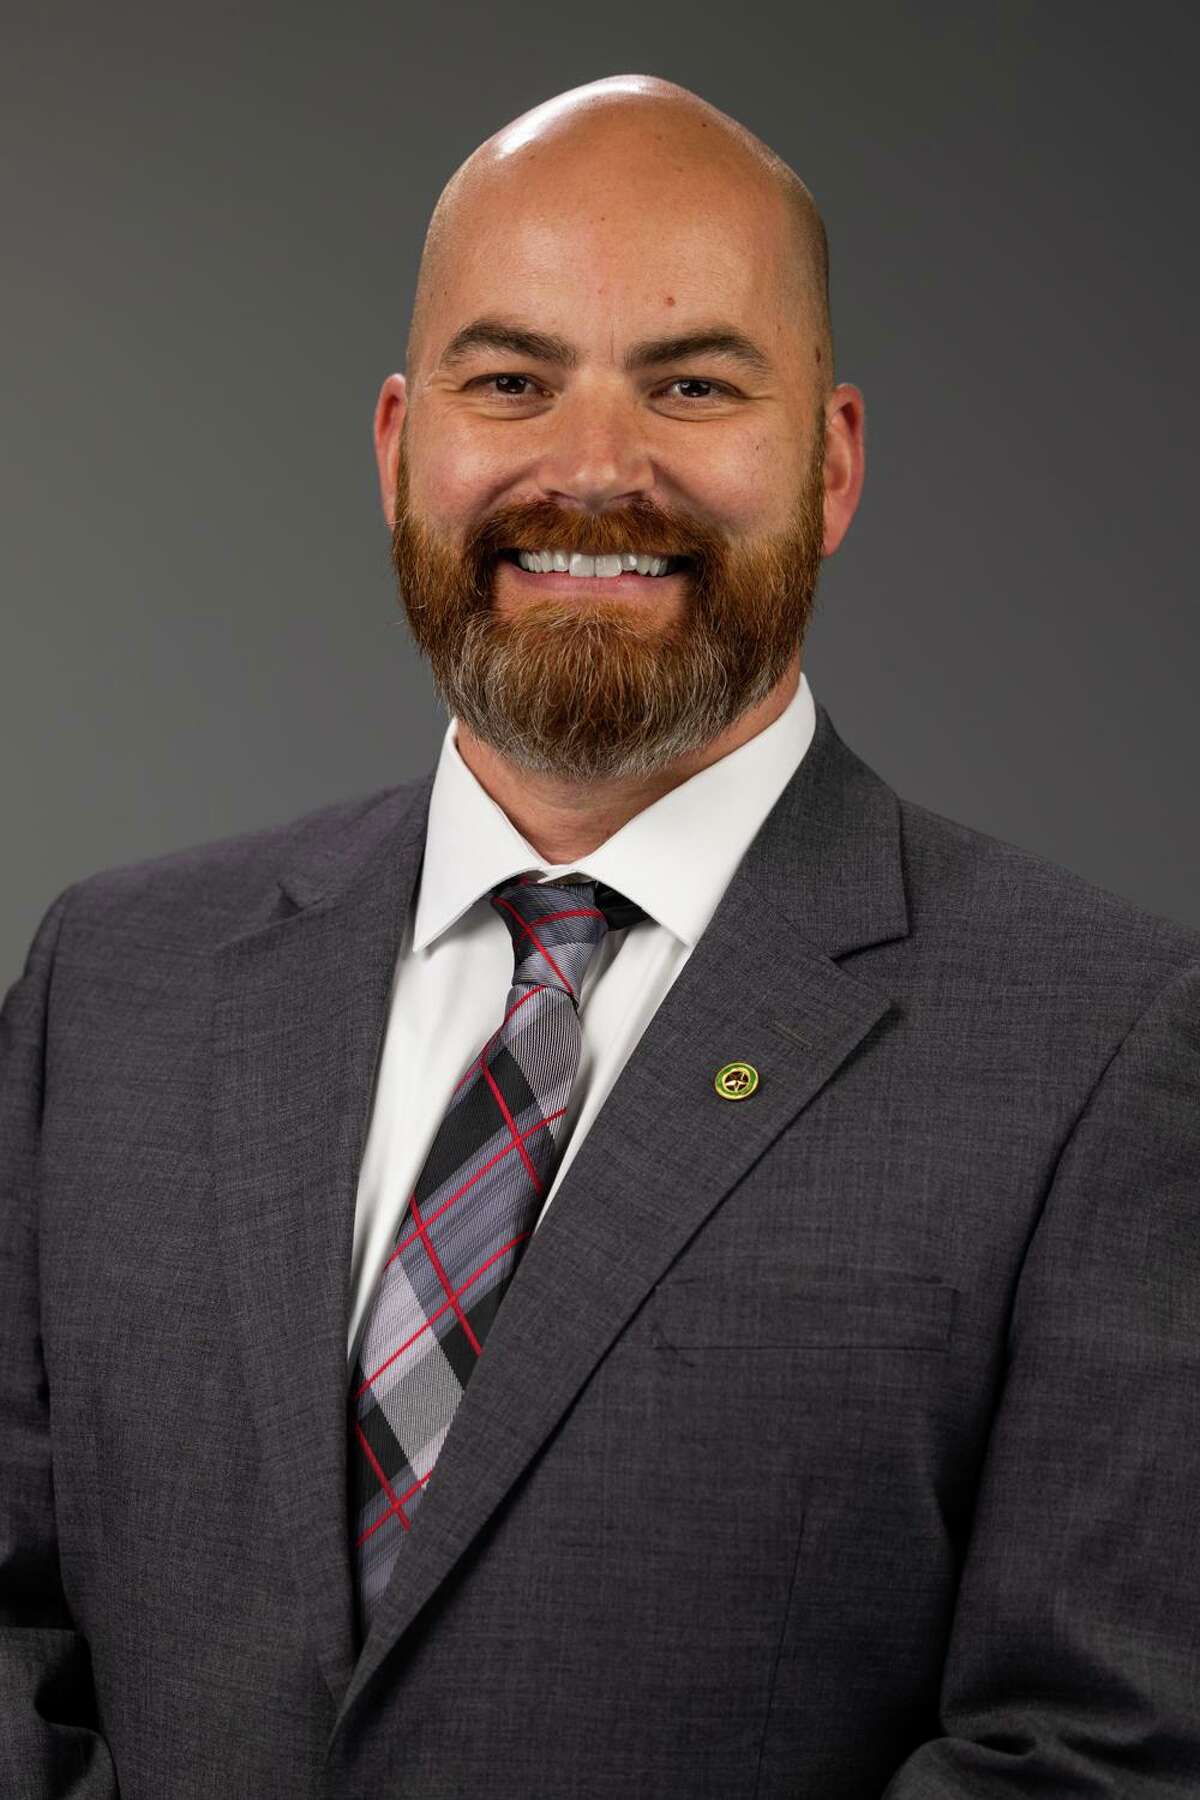 Joshua Hughes was named the new principal of Wilkerson Intermediate School at the CISD Board of Trustees meeting on Feb. 15, 2022.